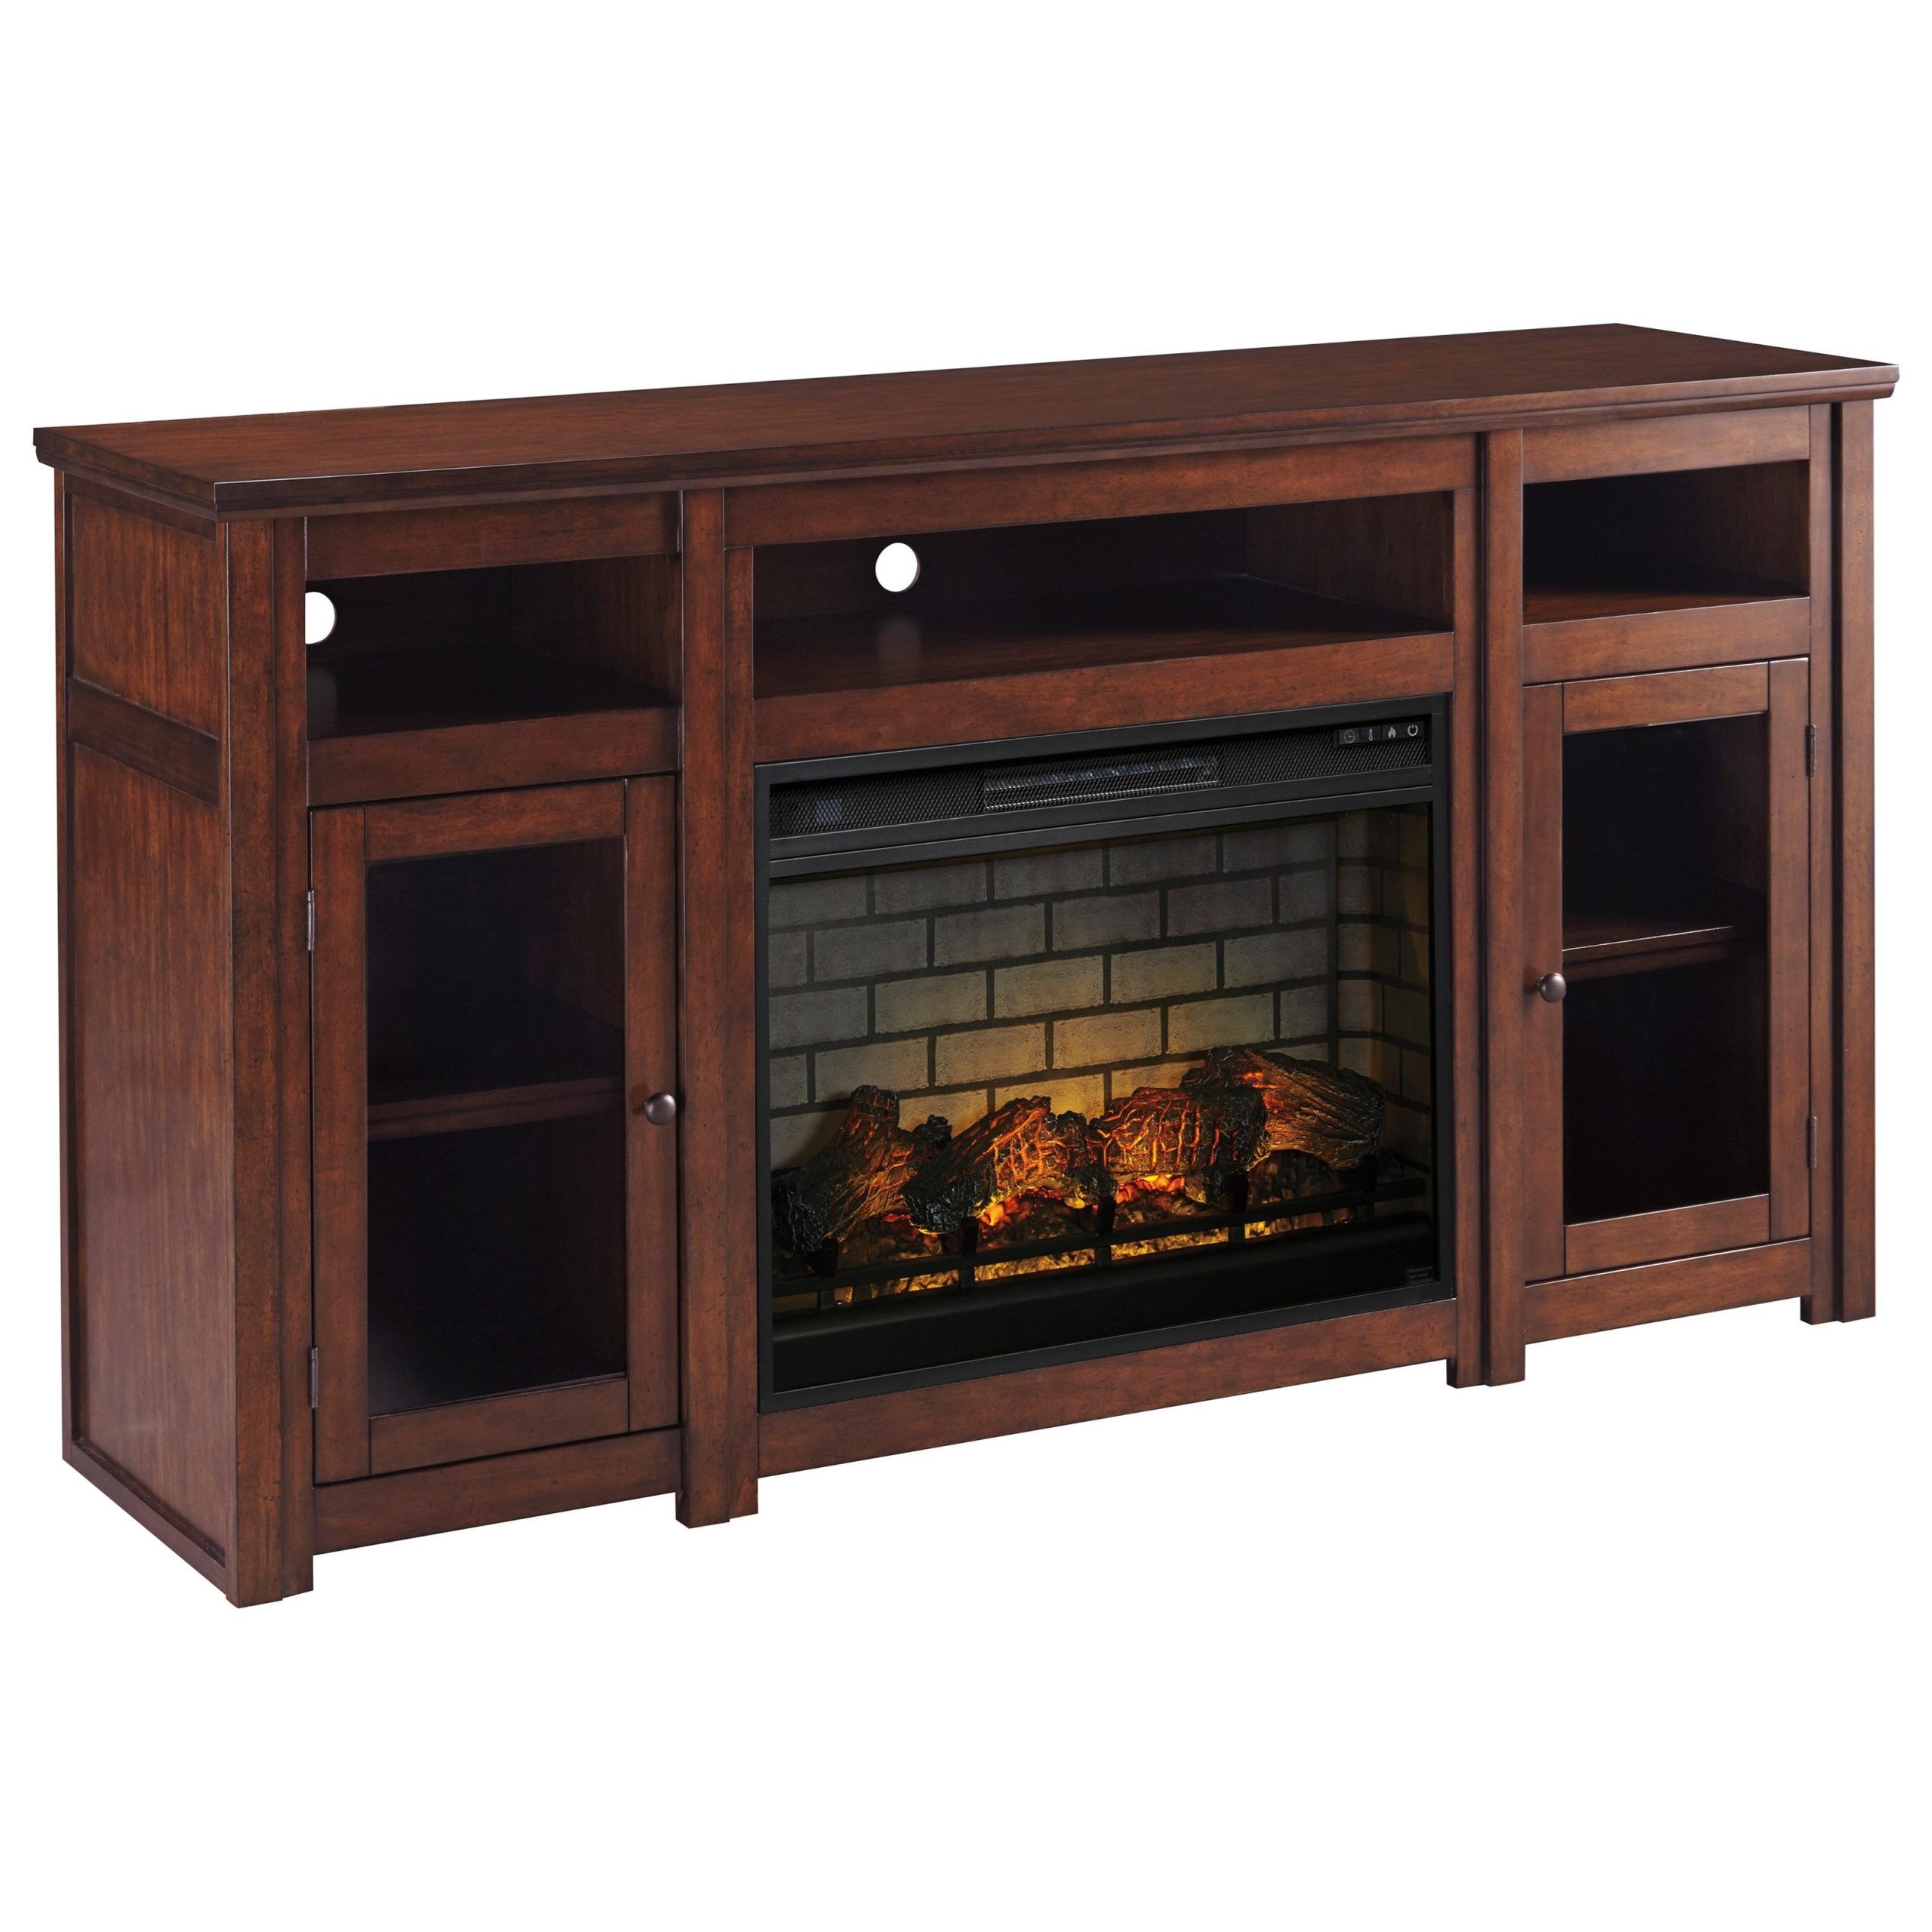 Signature Designashley Harpan Transitional Extra Large Tv Stand Pertaining To Modern Fireplace Tv Stands (Gallery 14 of 20)